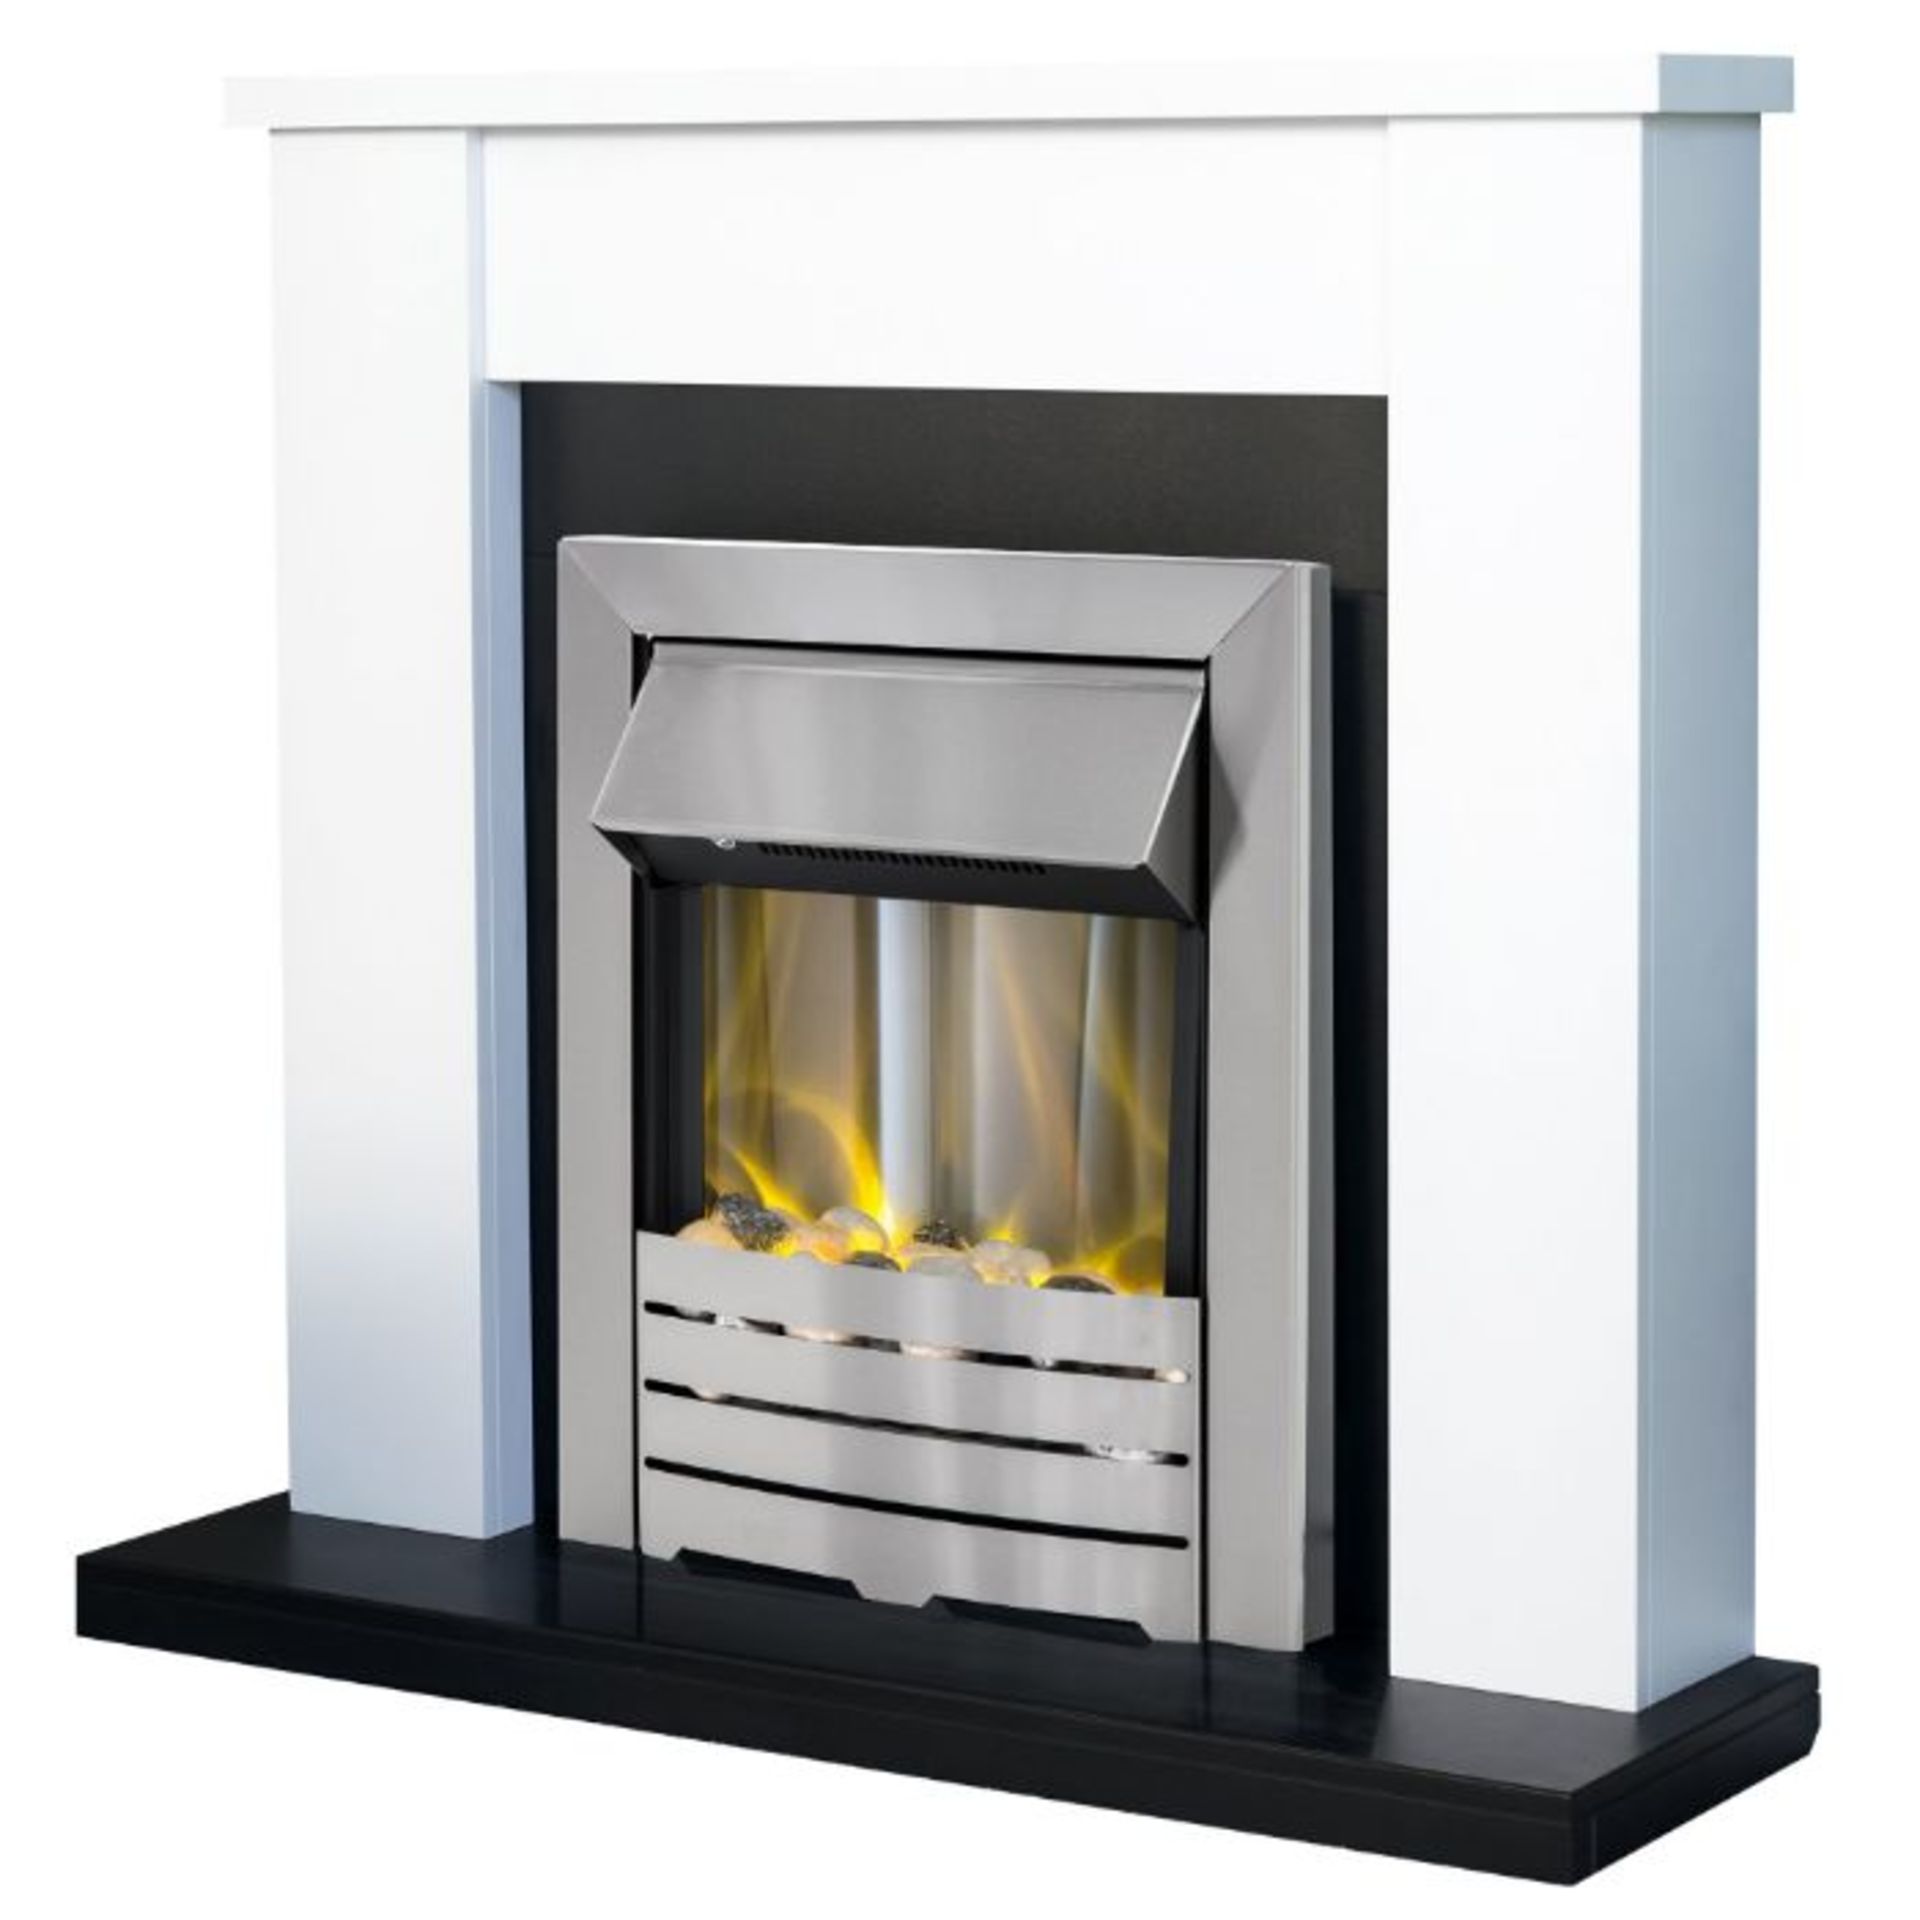 Adam,Solus Electric Fire Suite (BLACK) (BOXED, RETURN, NOT CHECKED) (U002281760) RRP -£289.23 (